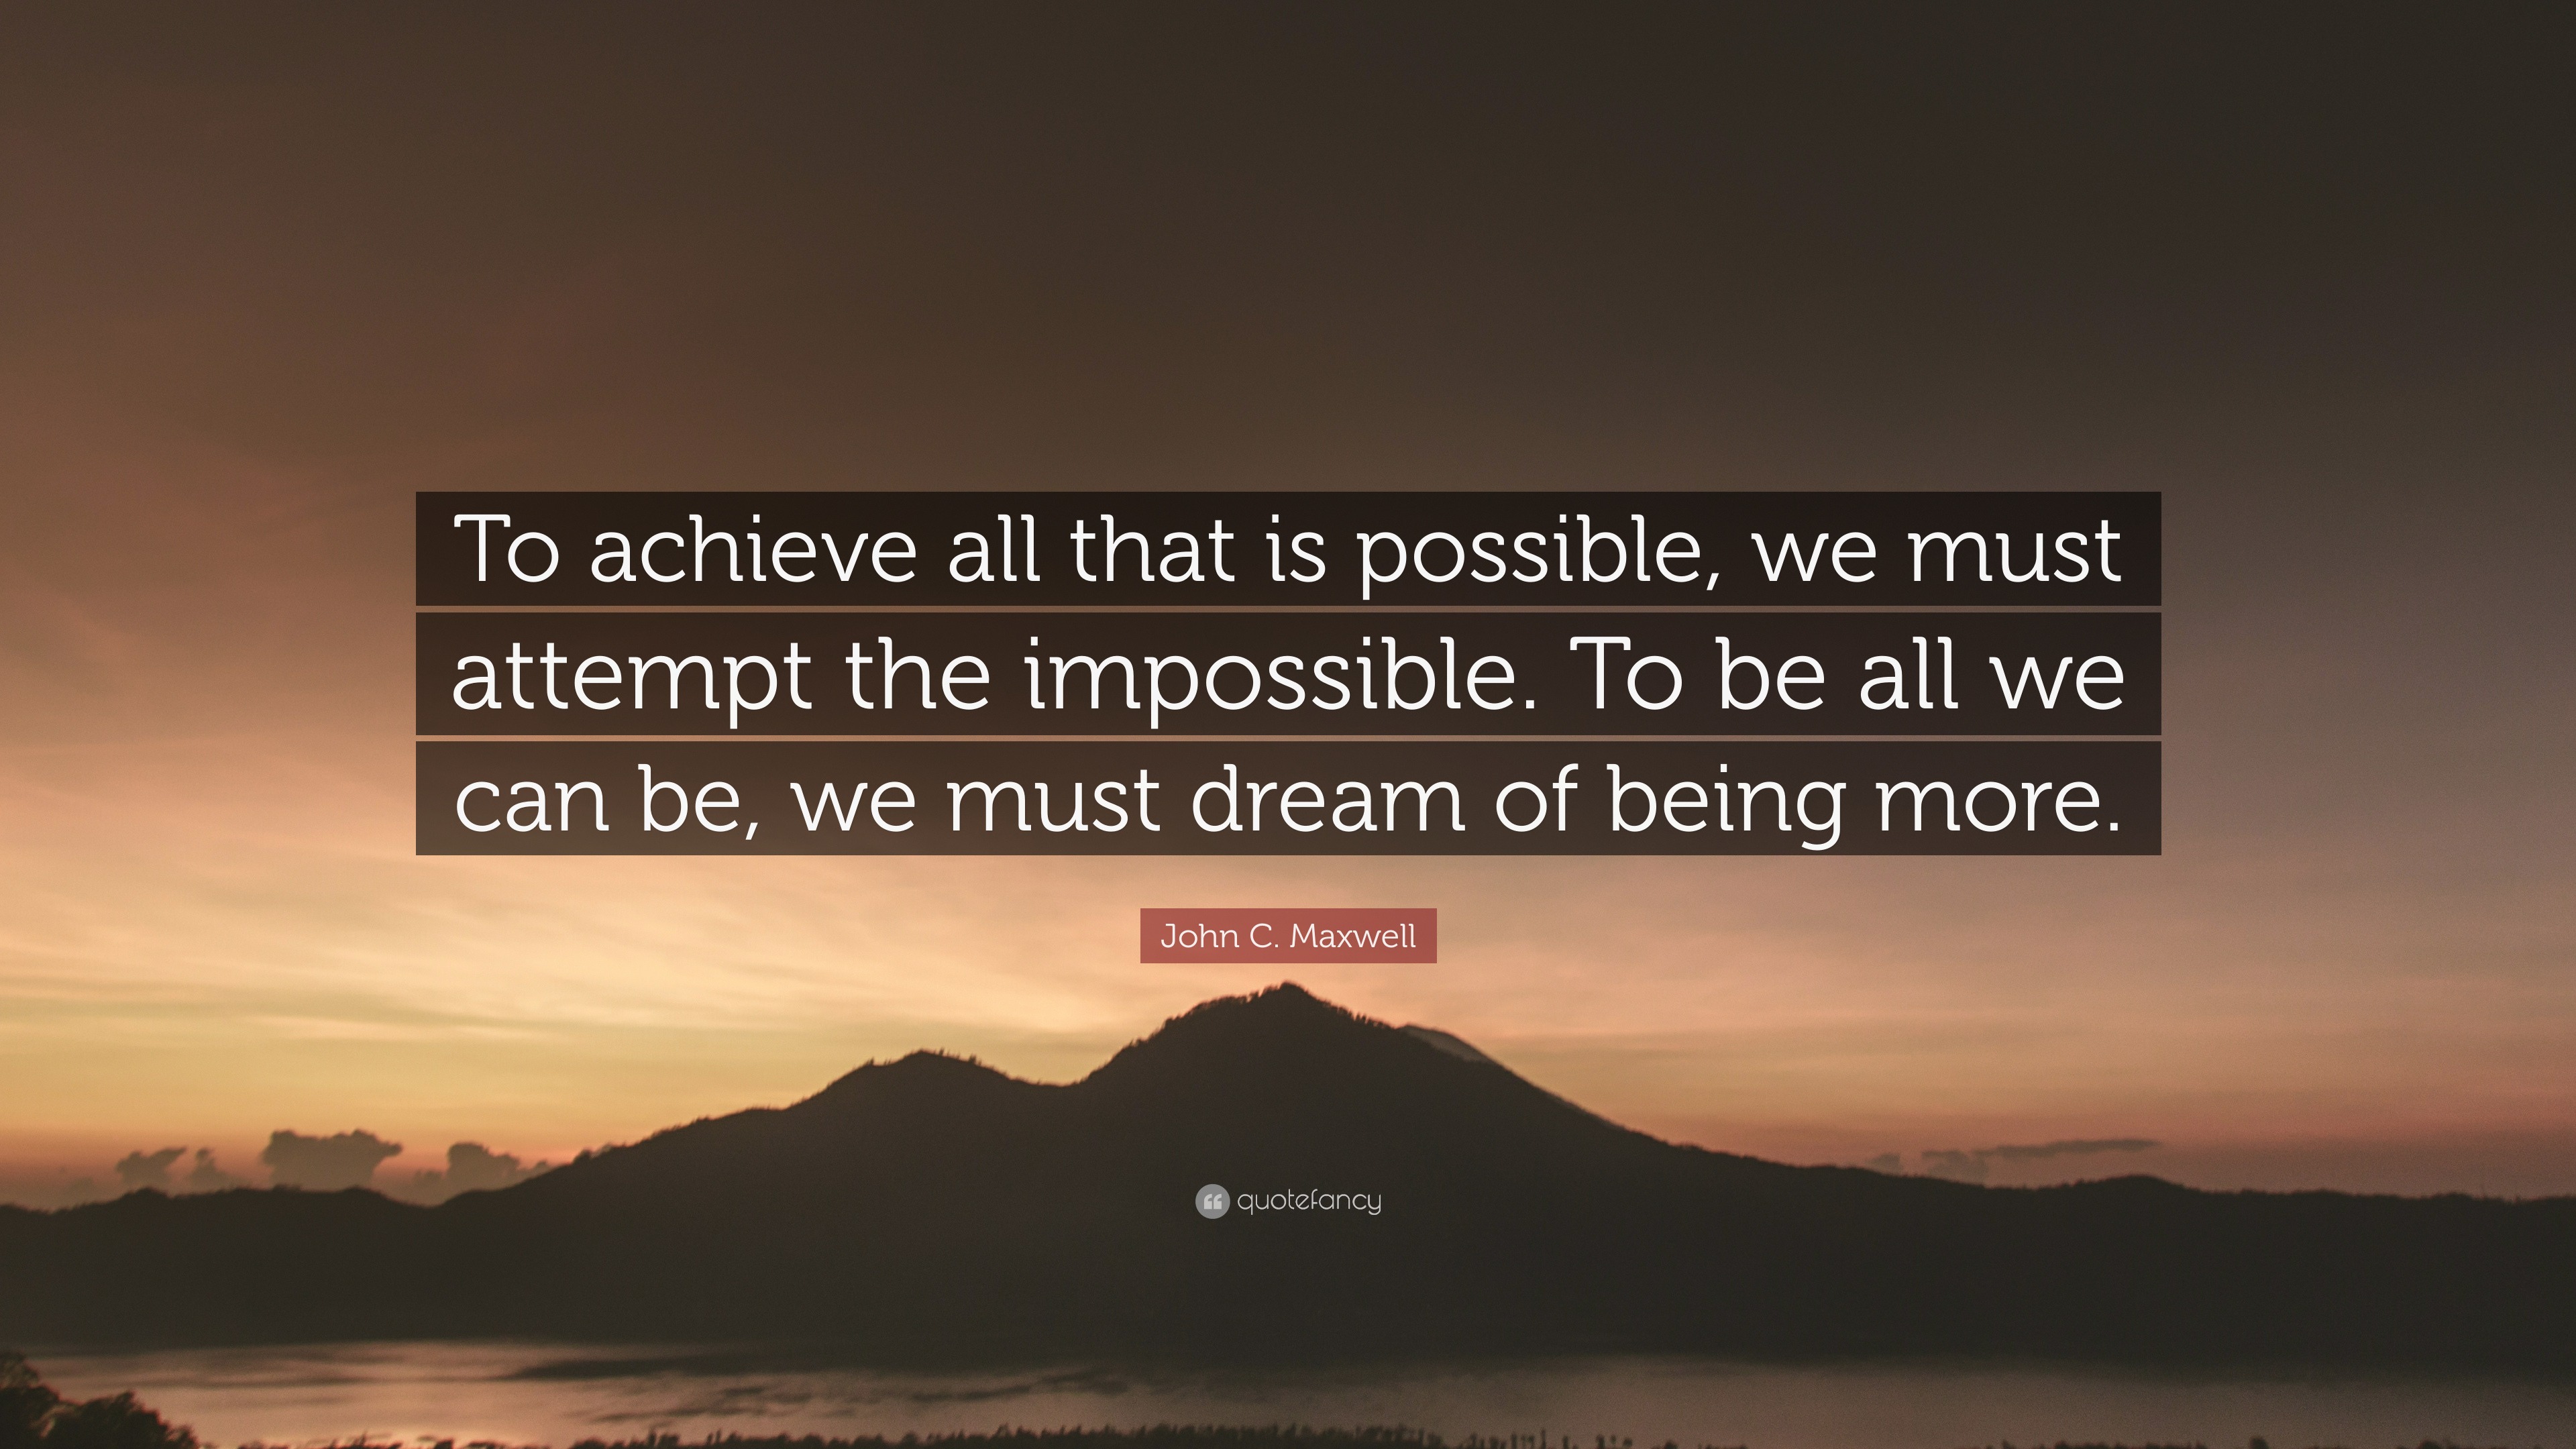 John C. Maxwell Quote: “To achieve all that is possible, we must ...